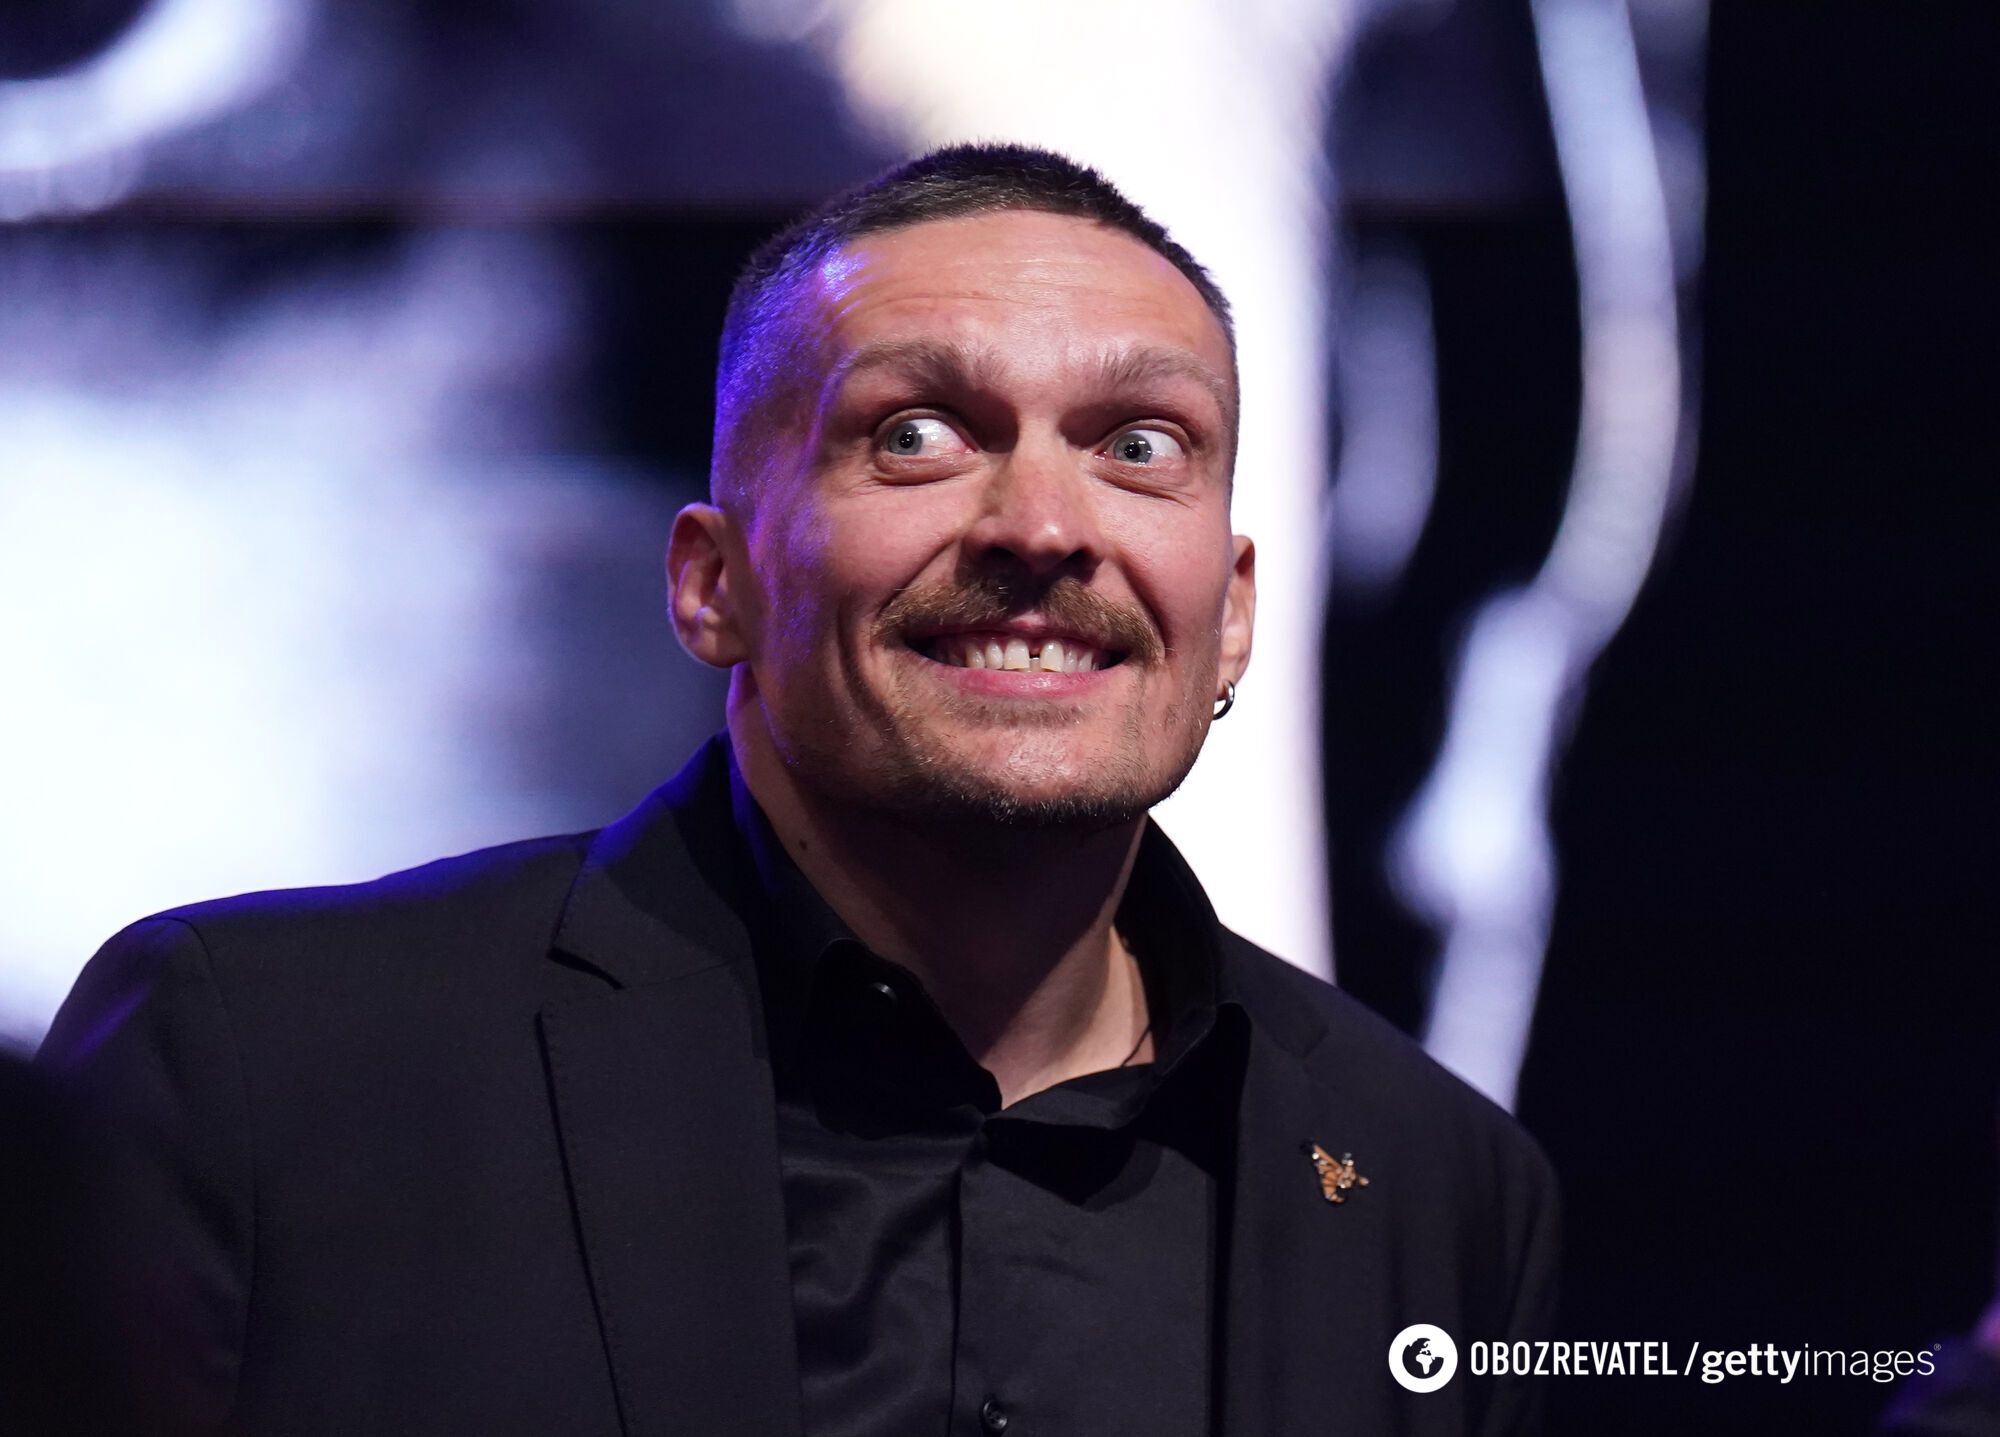 A nutritionist has revealed the secret ingredient that Fury adds to his food before the fight with Usyk